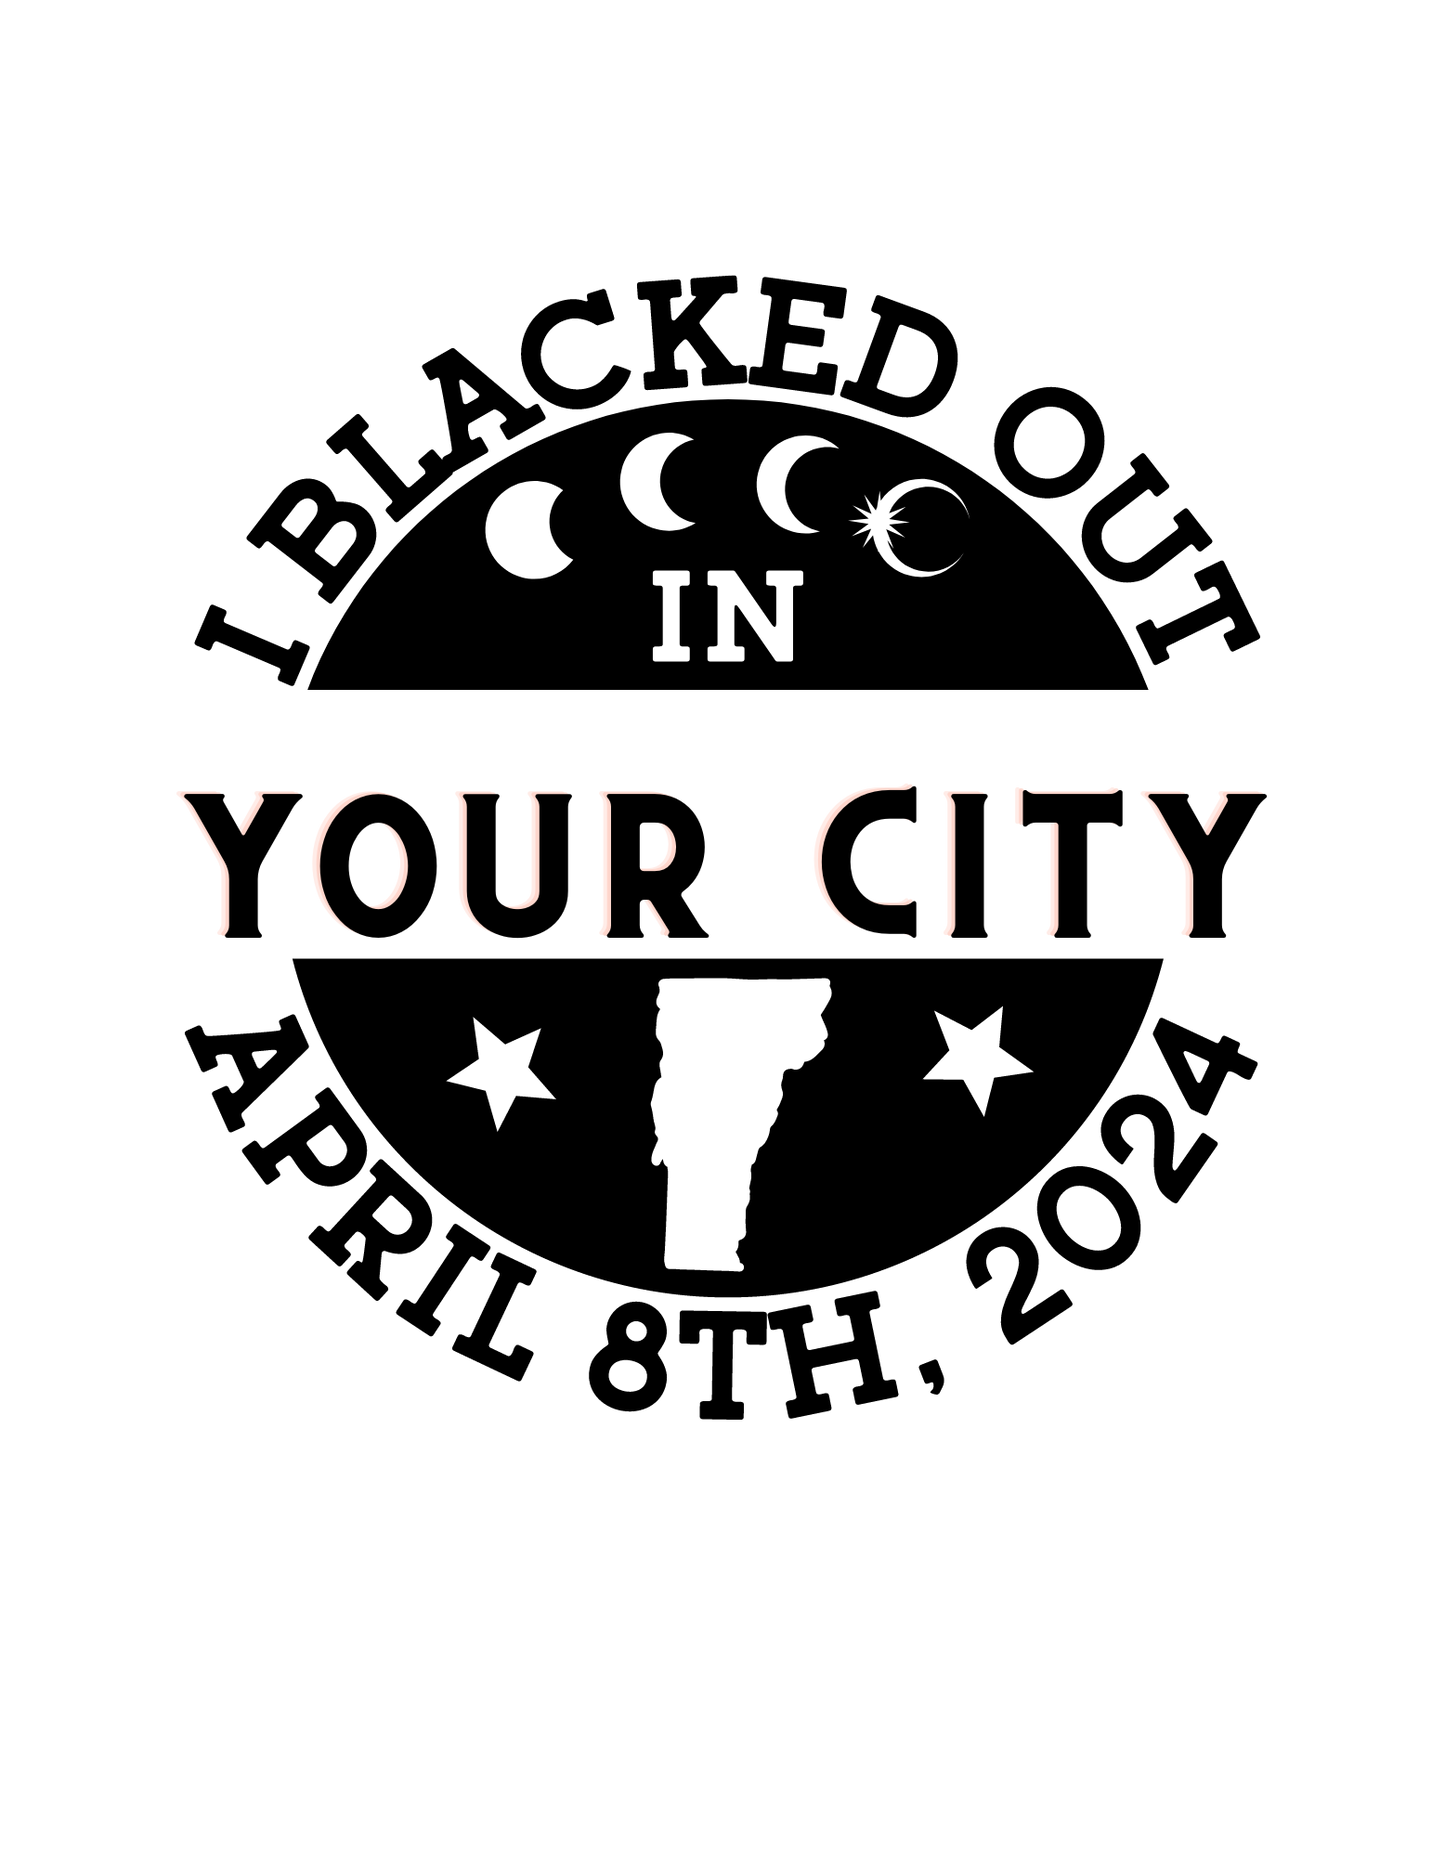 I blacked out in State/YOUR CITY- T-shirt (WHITE FONT)